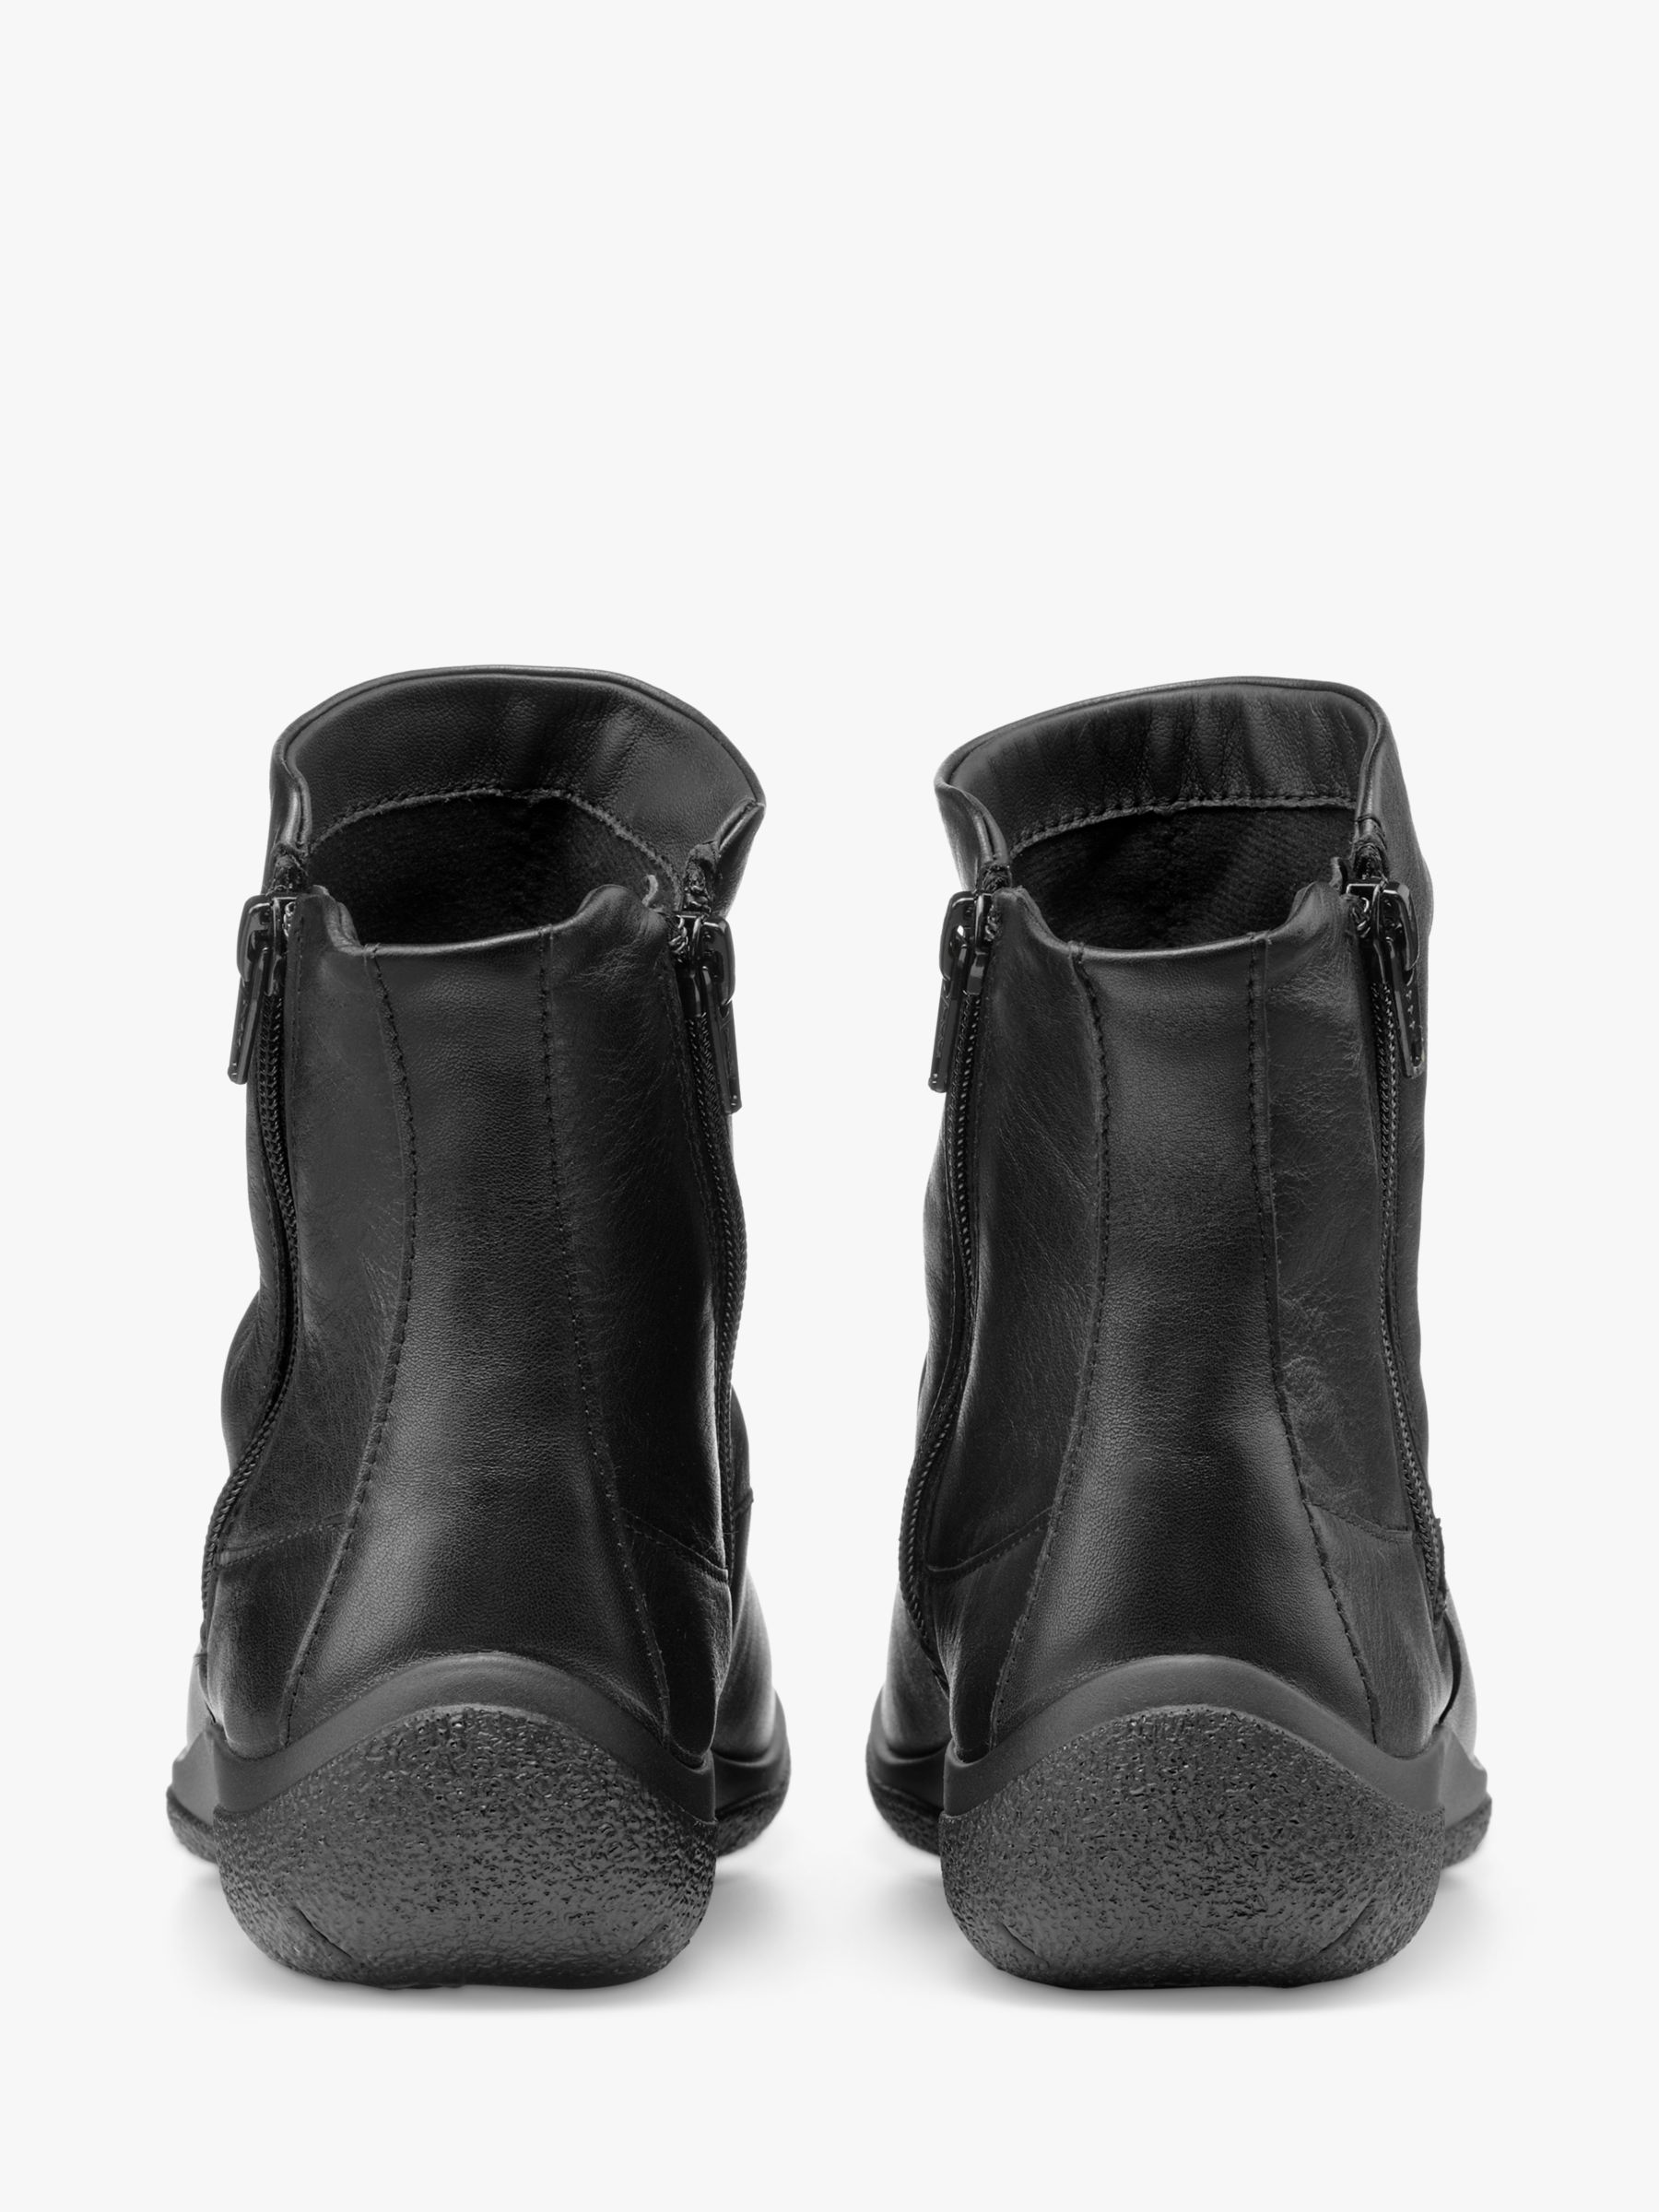 Hotter Whisper Wide Fit Slouch Ankle Boots, Black, 6